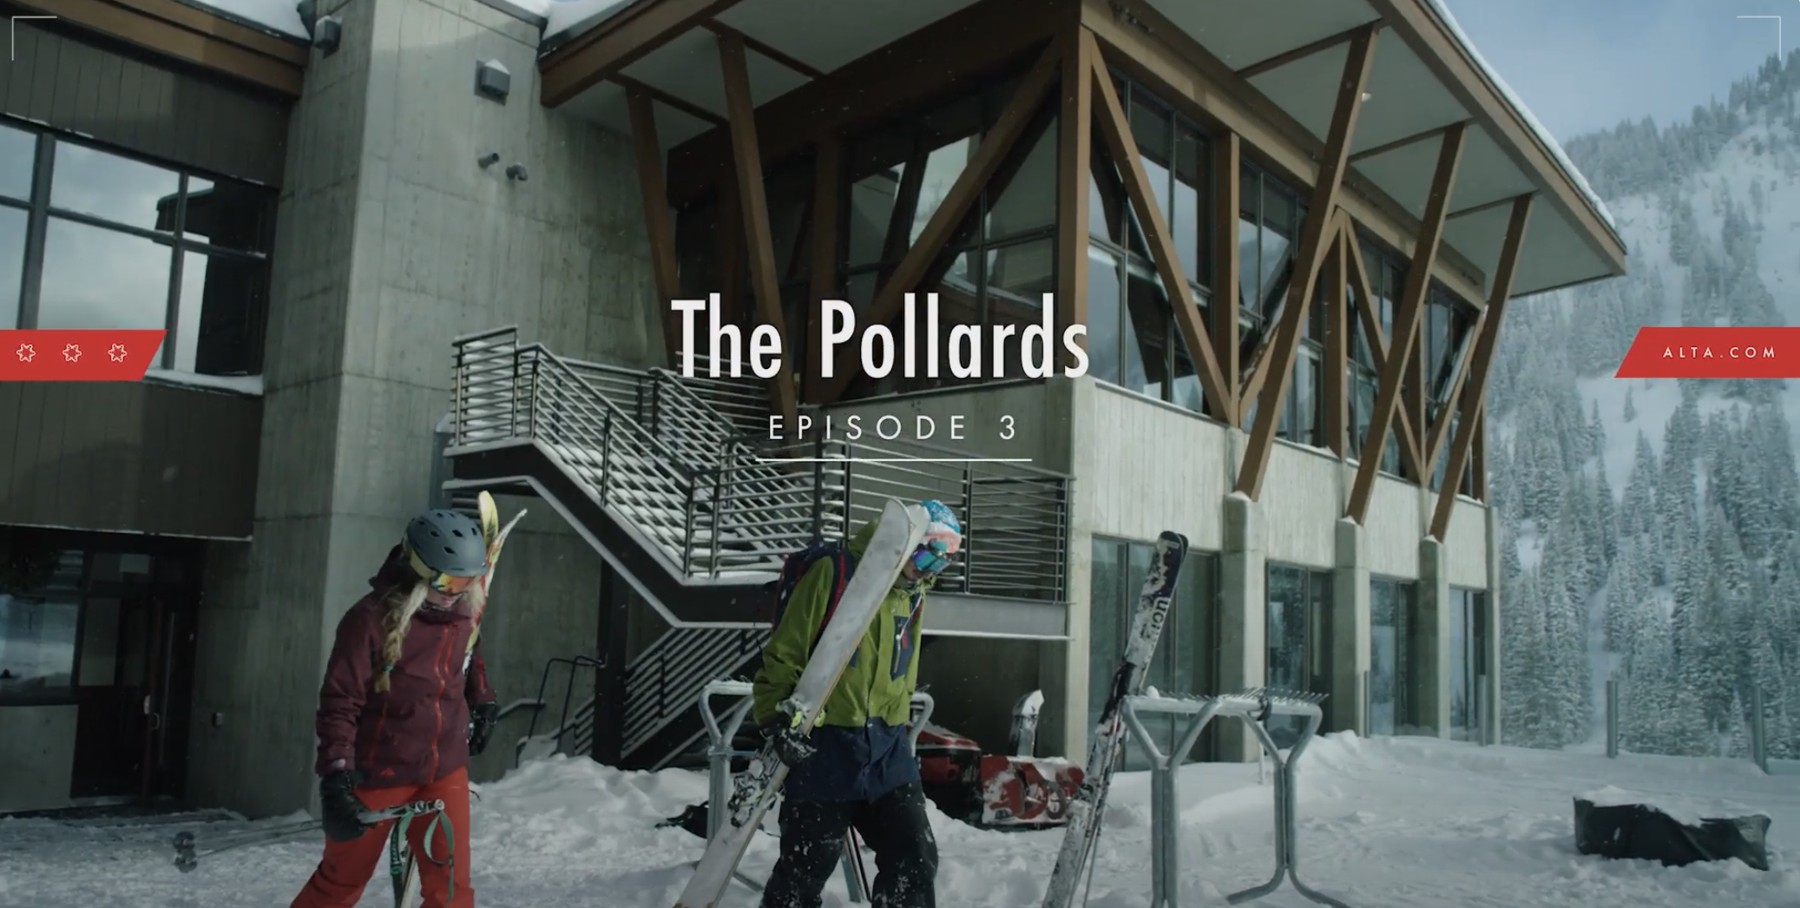 Steeped In Tradition Episode 3: The Pollards